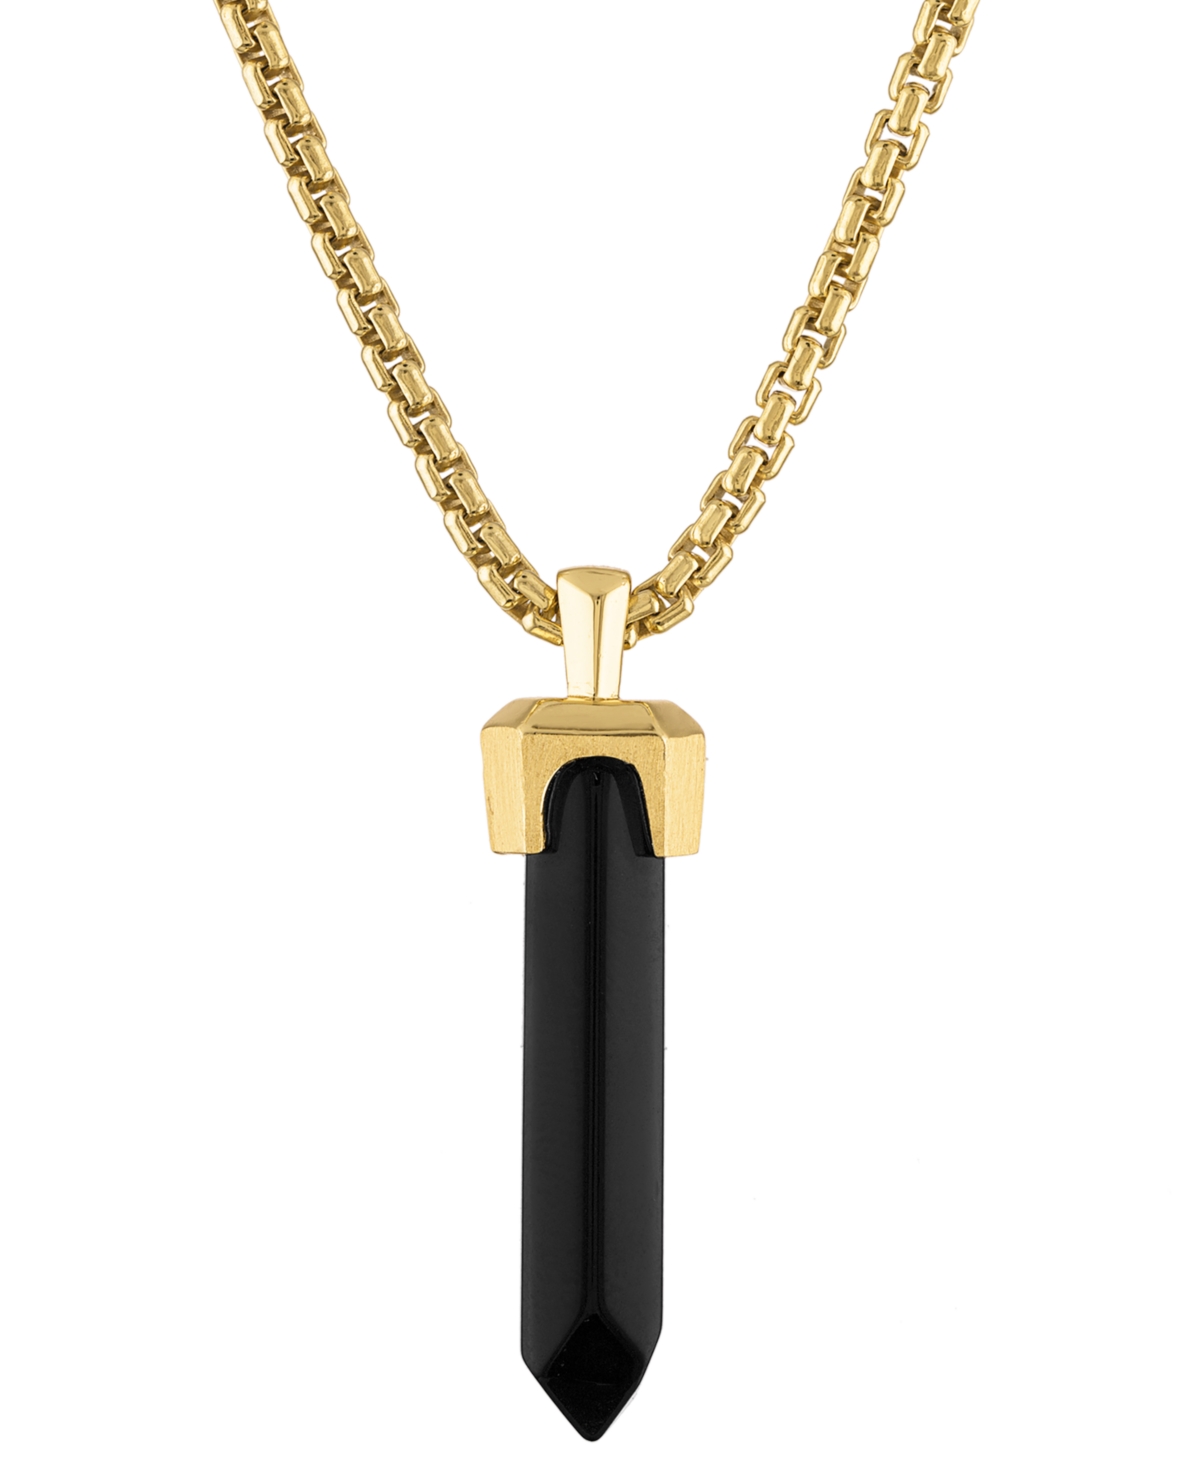 Bulova Men's Icon Black Onyx Pendant Necklace In 14k Gold-plated Sterling Silver, 24" + 2" Extender In Na